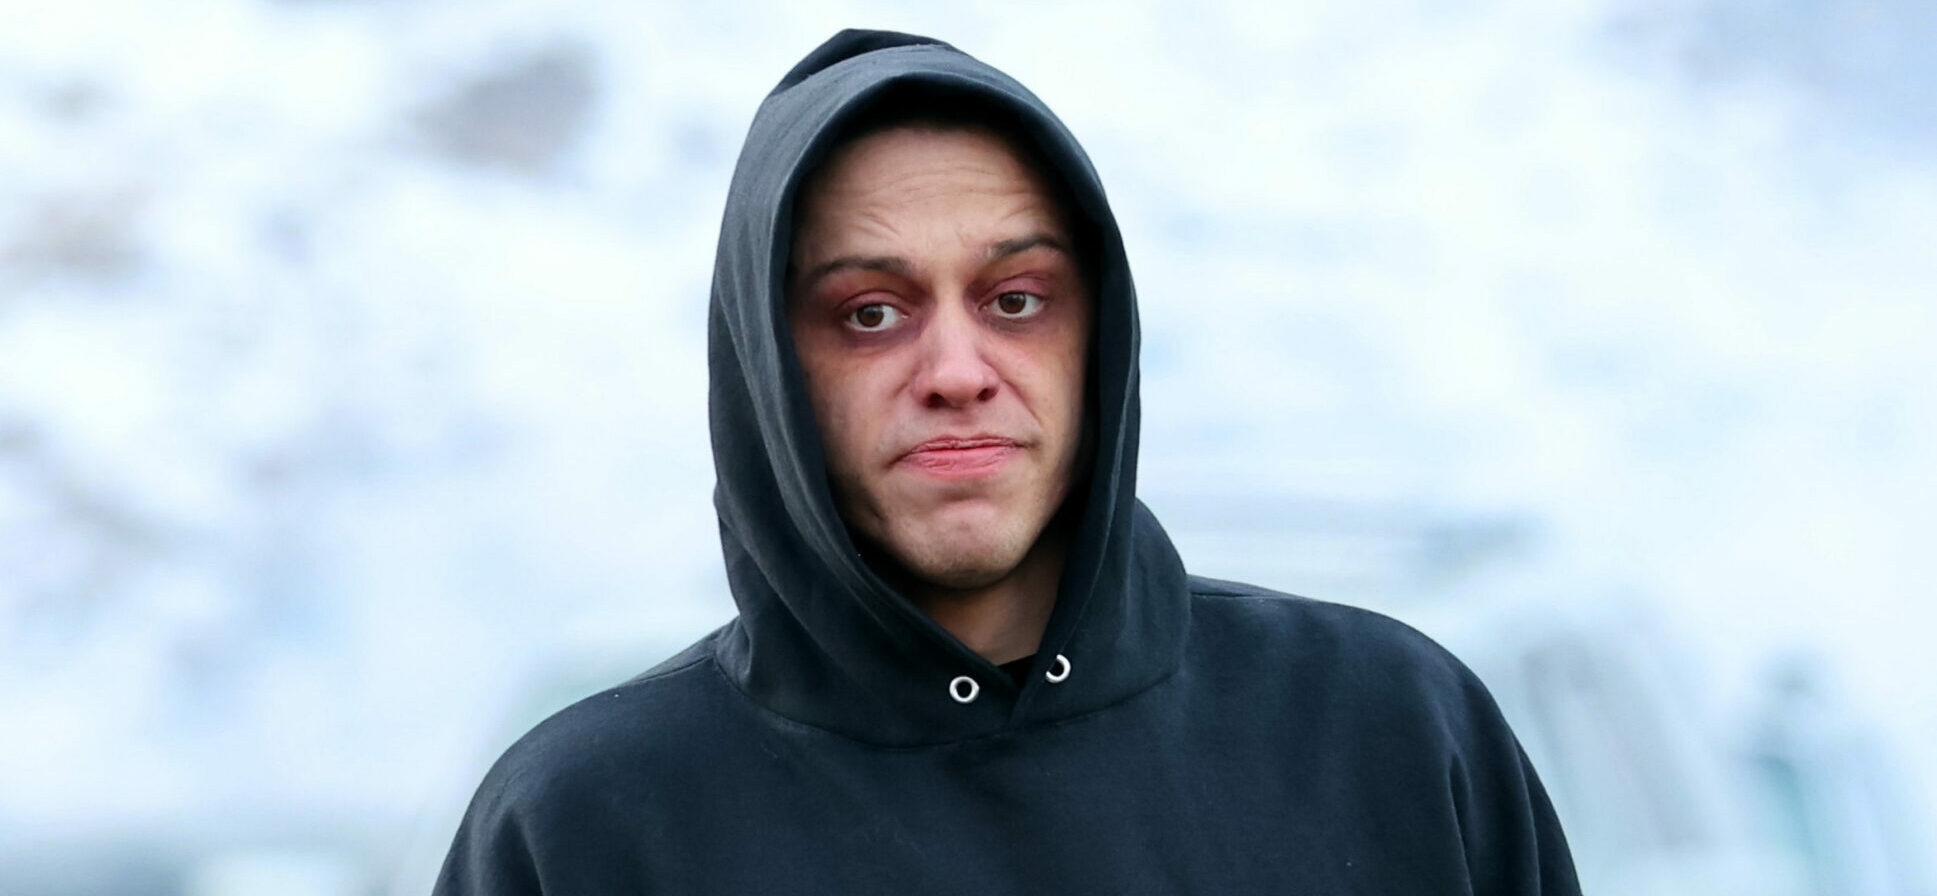 Pete Davidson Involved In Second Car Crash Amid Worries About Well-Being From ‘Inner Circle’